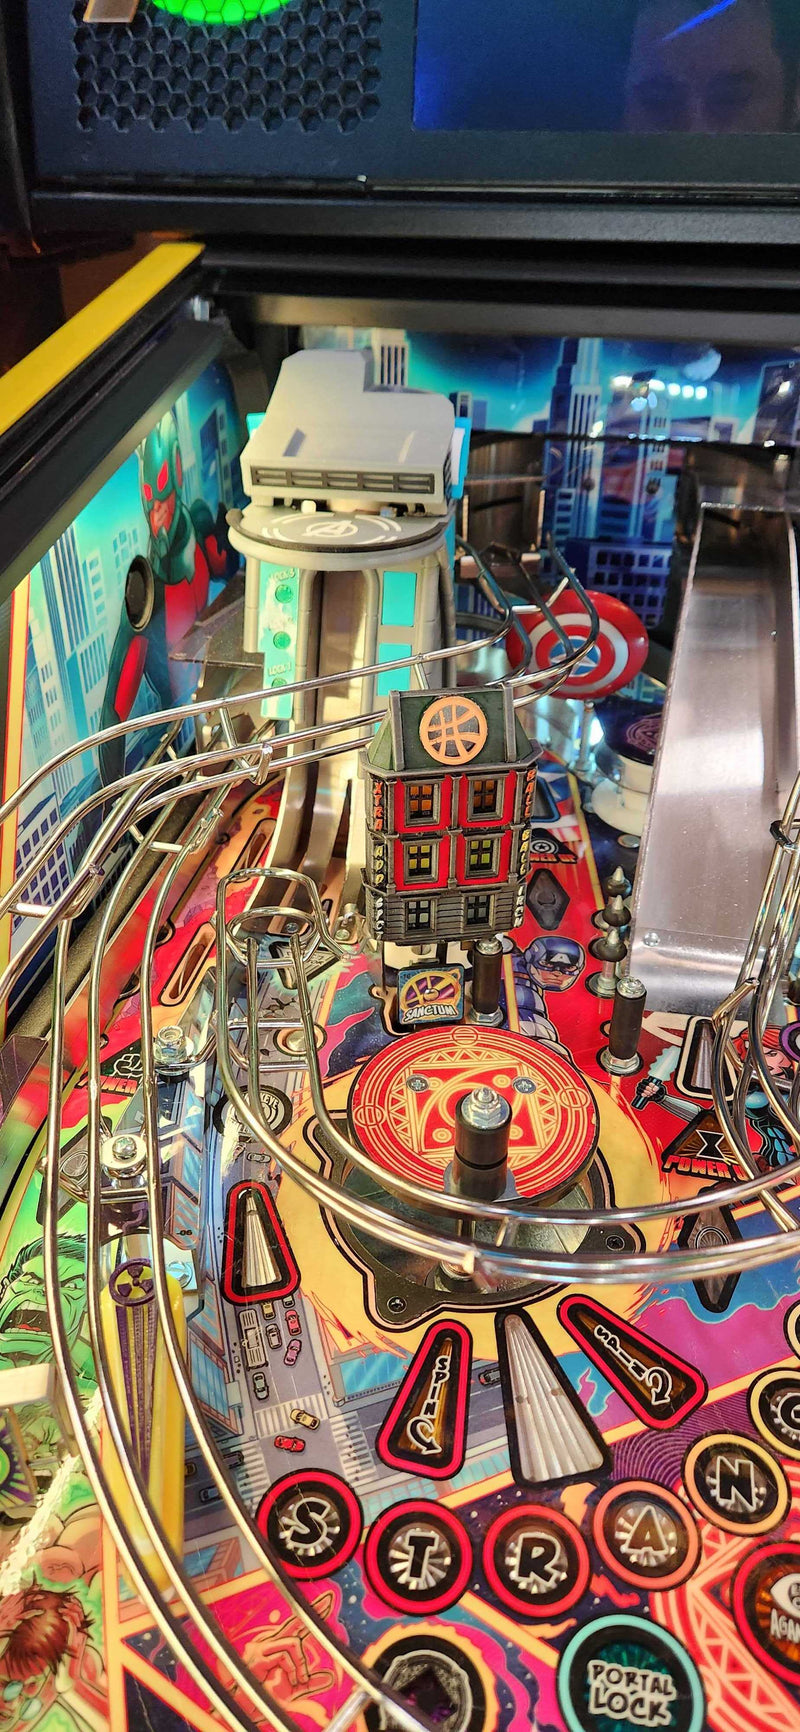 Avengers Infinity Quest Limited Edition Pinball Machine - [DEPOSIT]